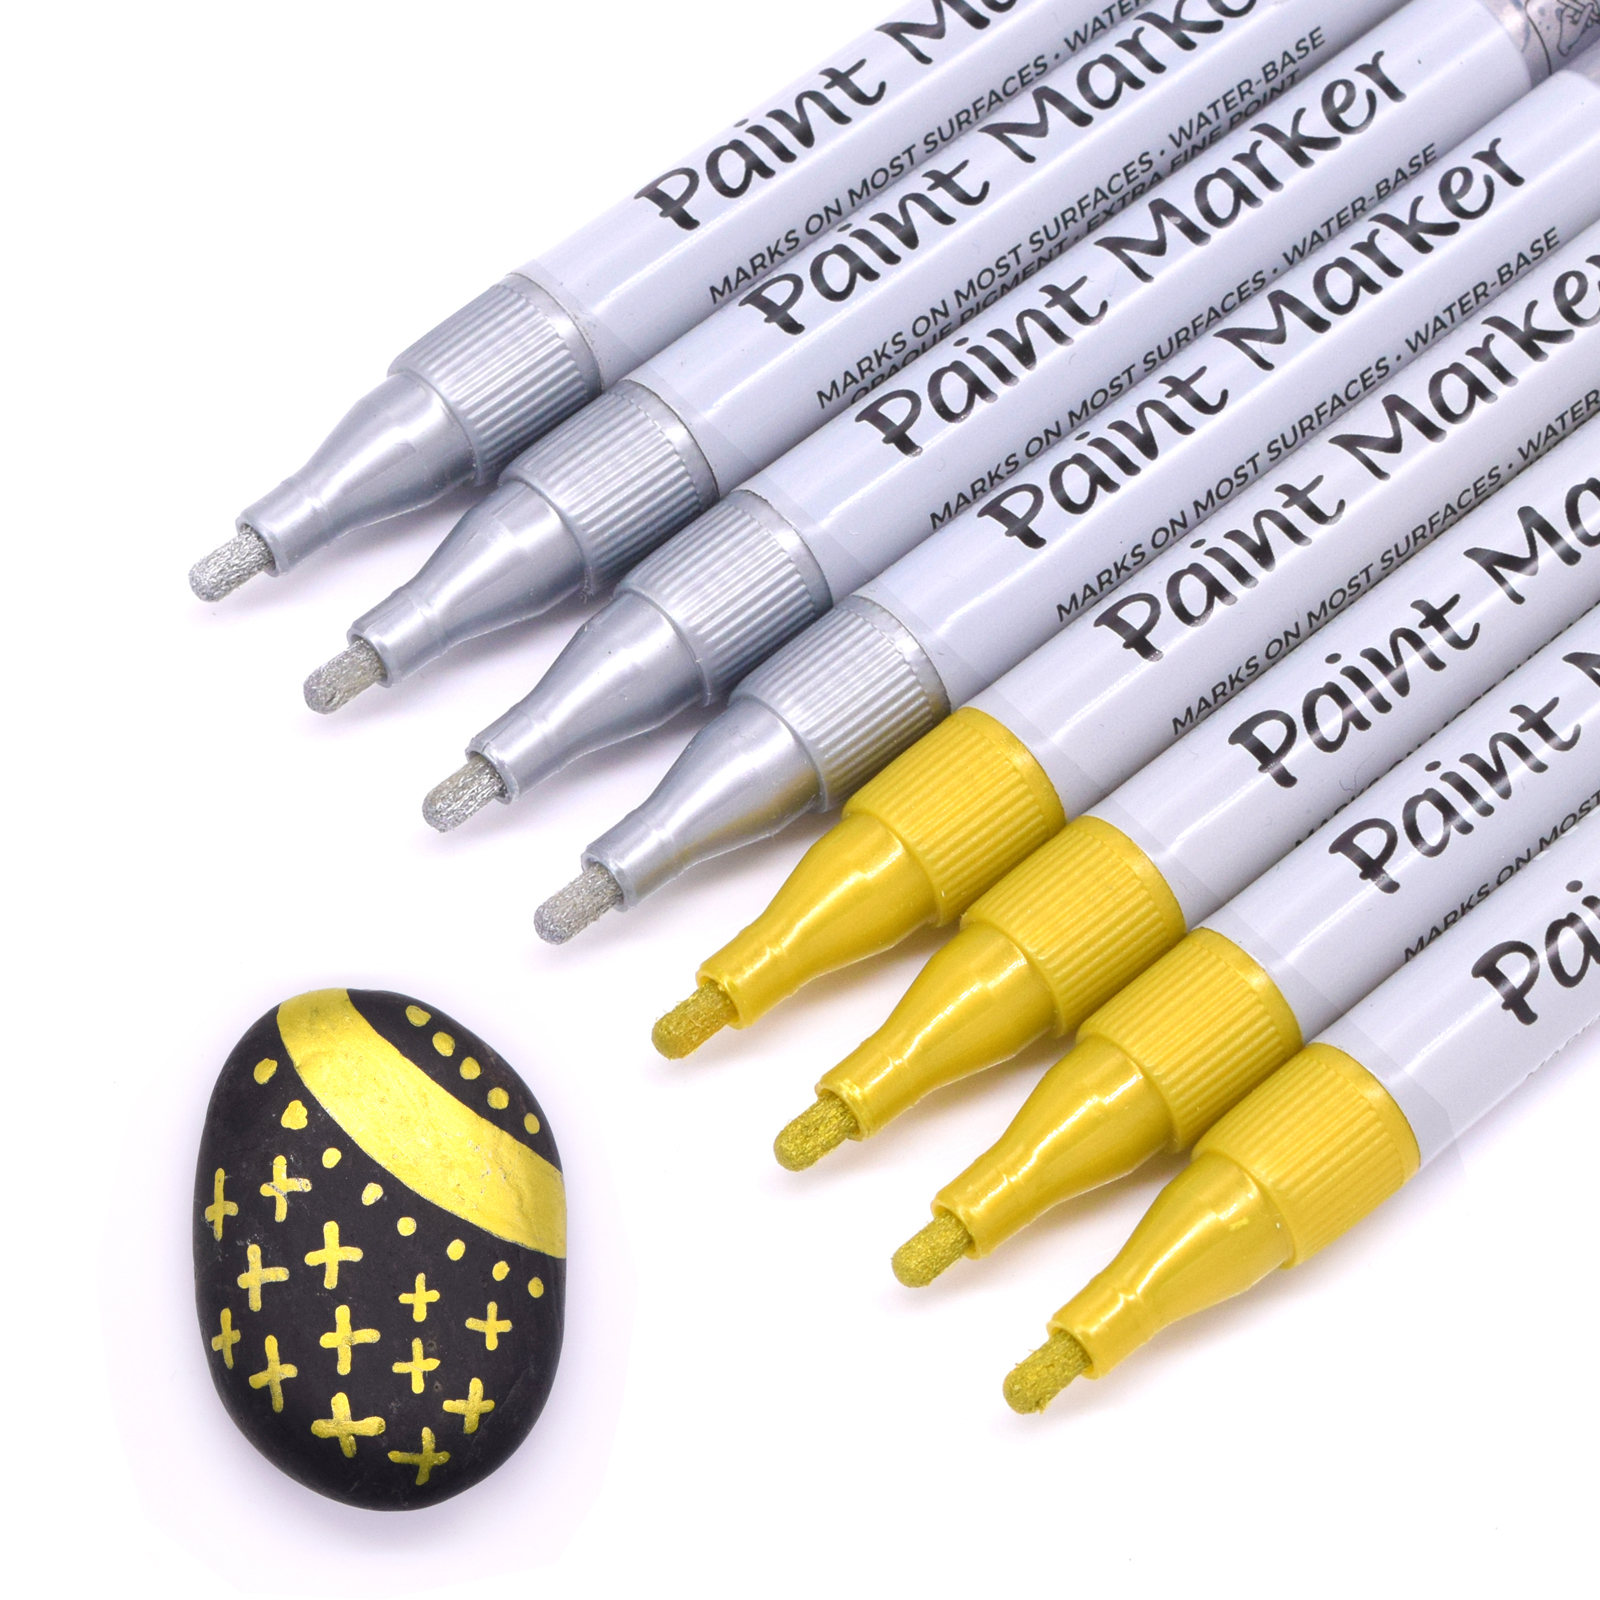 TWOHANDS Metallic Paint Markers,Gold & Silver,20918 Featured Image